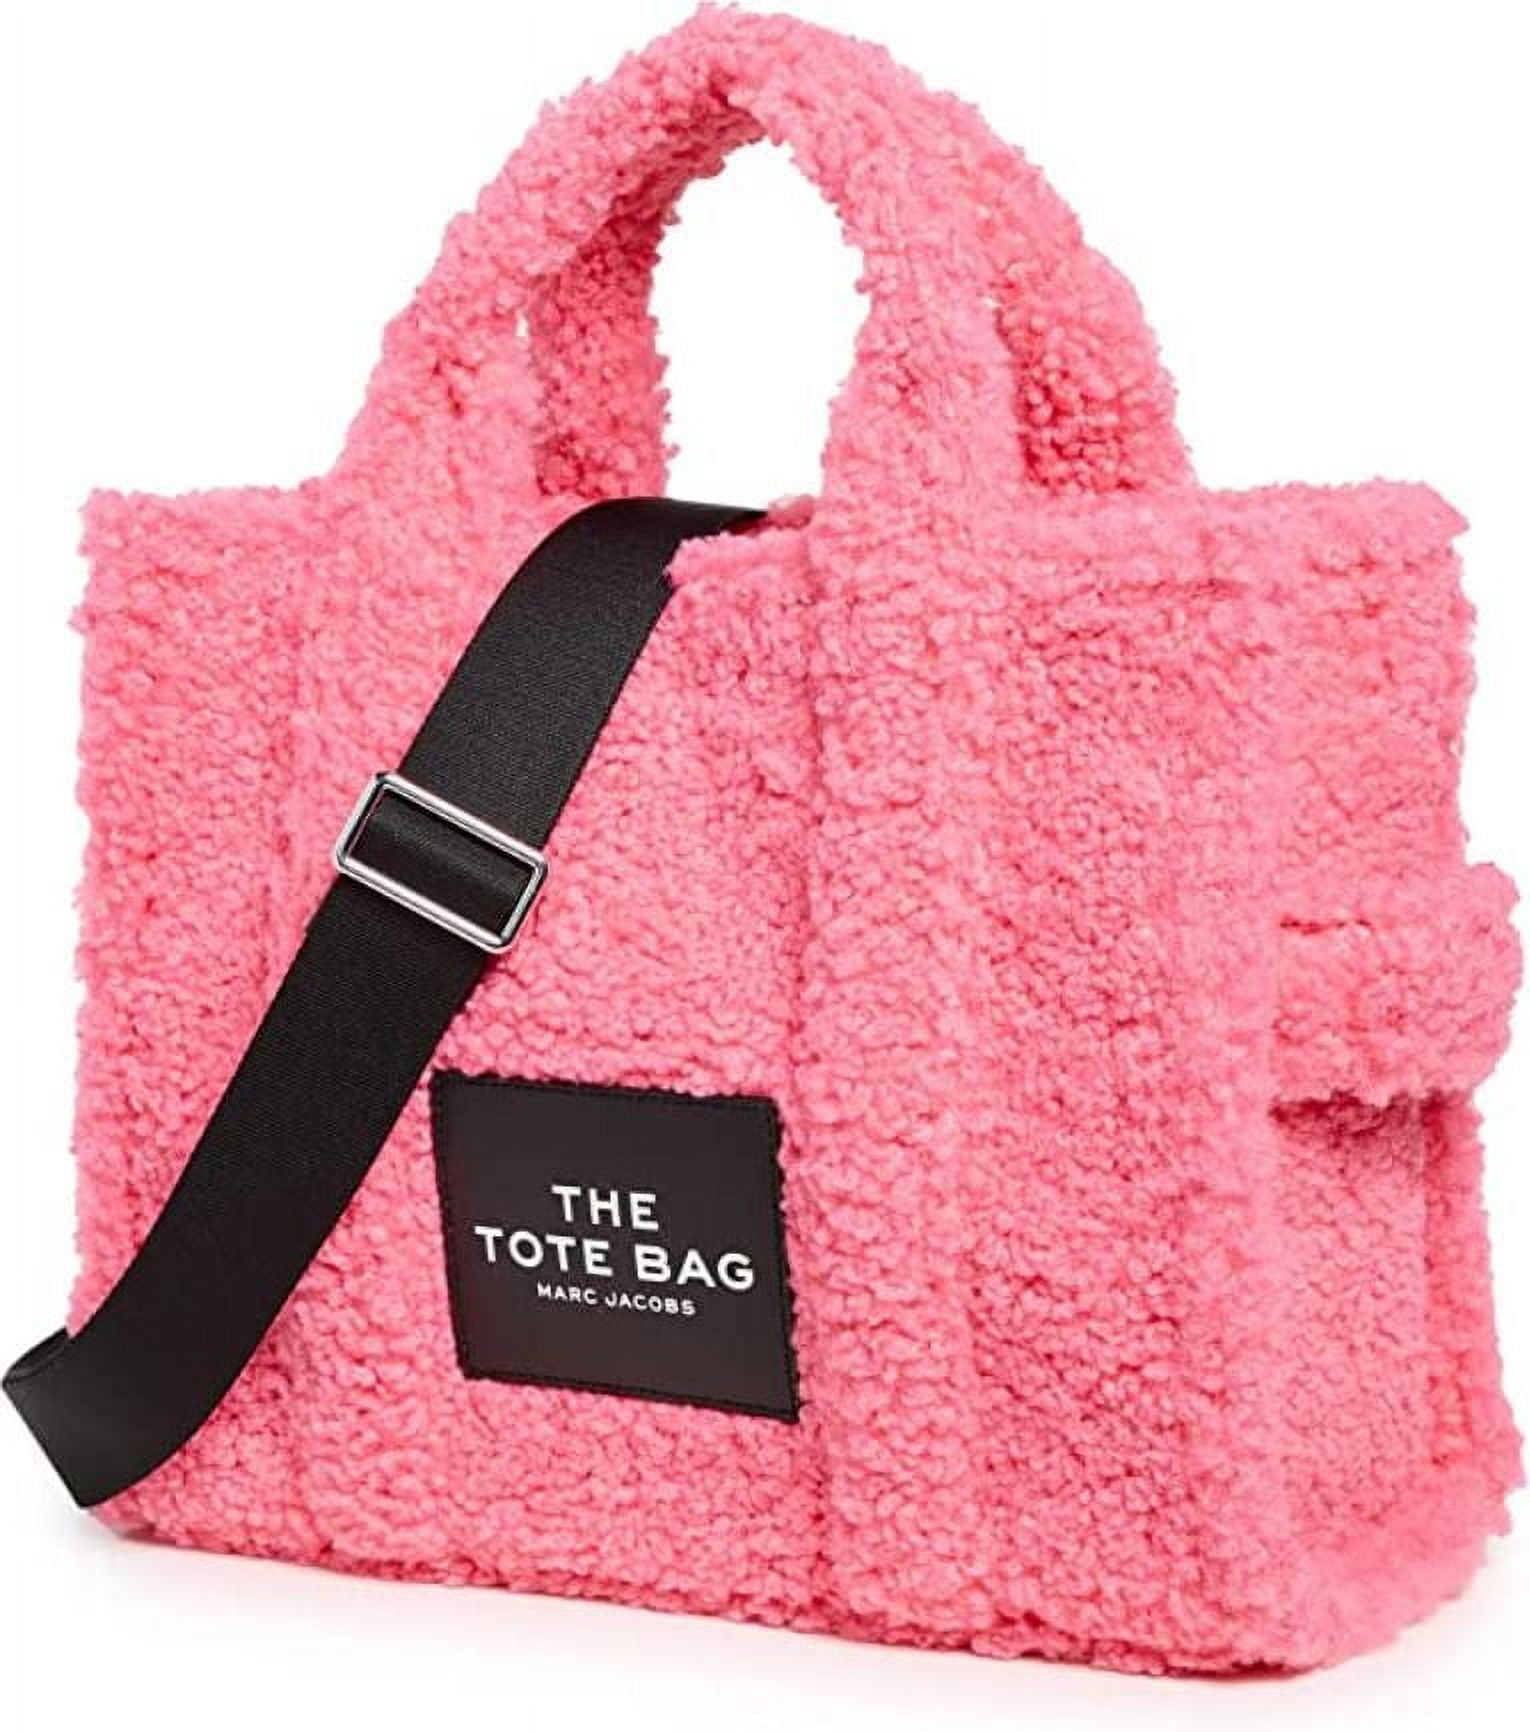 Marc Jacobs Women's The Teddy Medium Tote Bag, Fluffy Pink, M0016740-67 One  Size